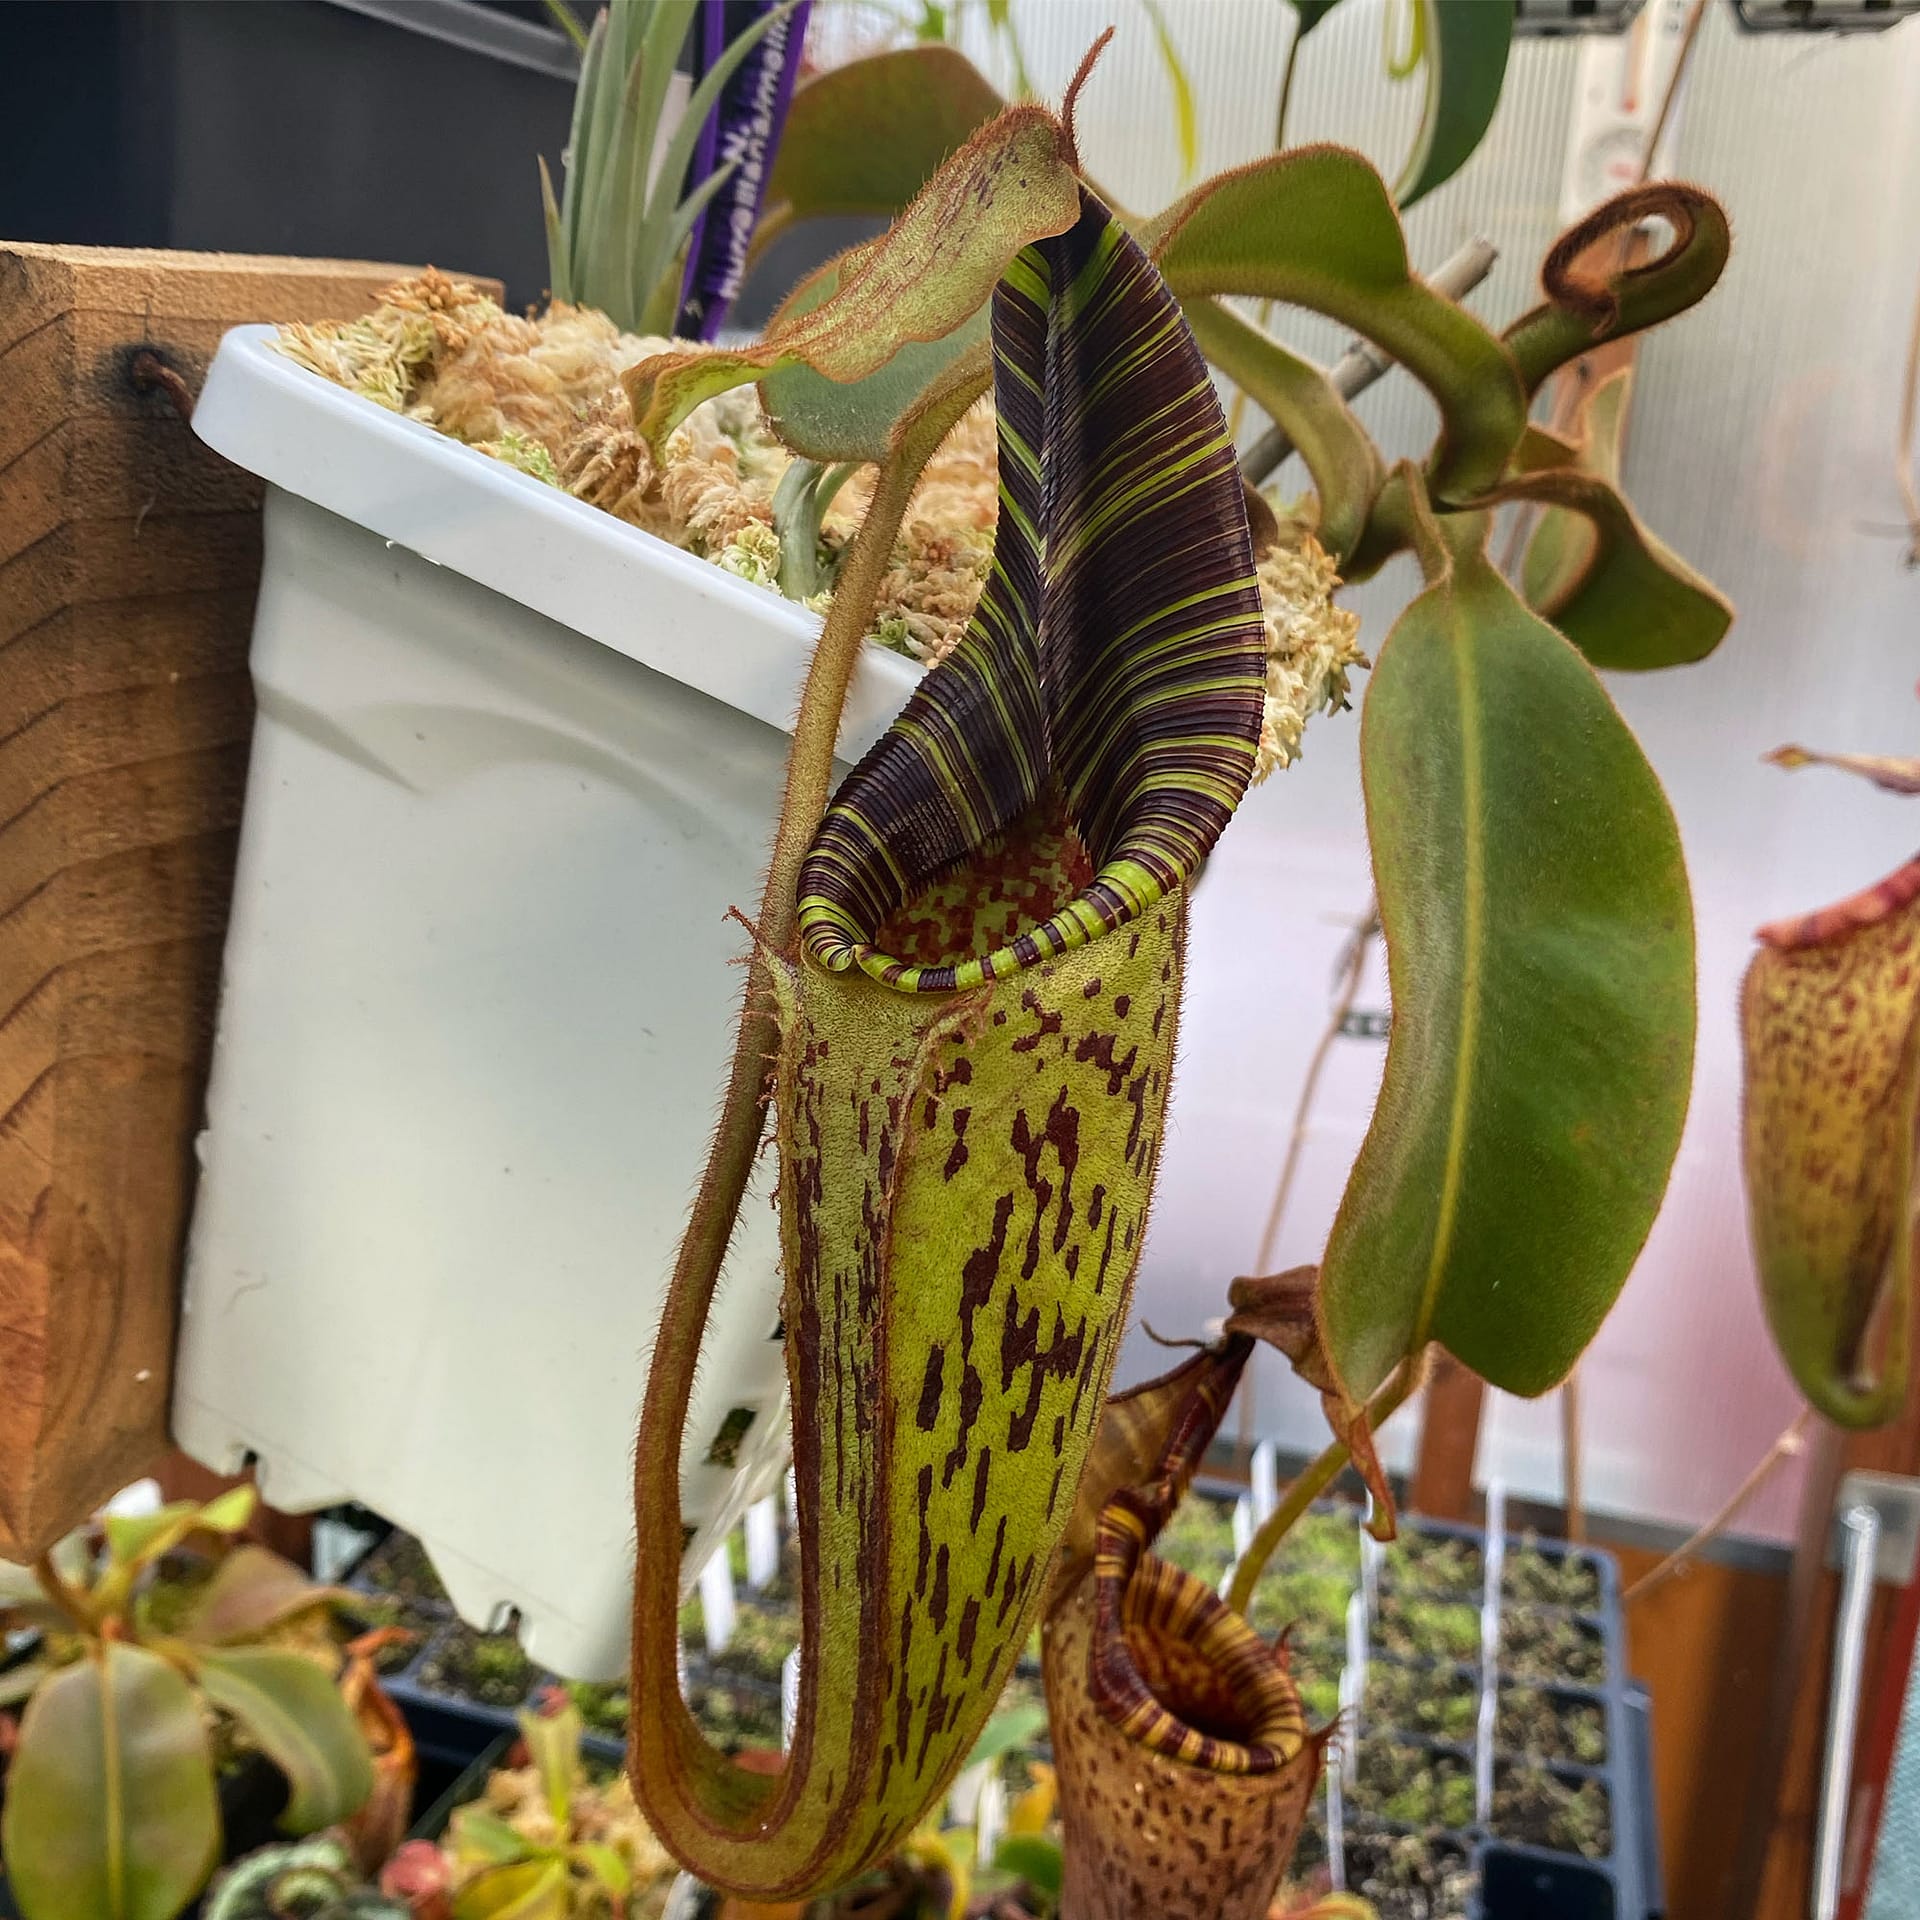 A Nepenthes pitcher plant